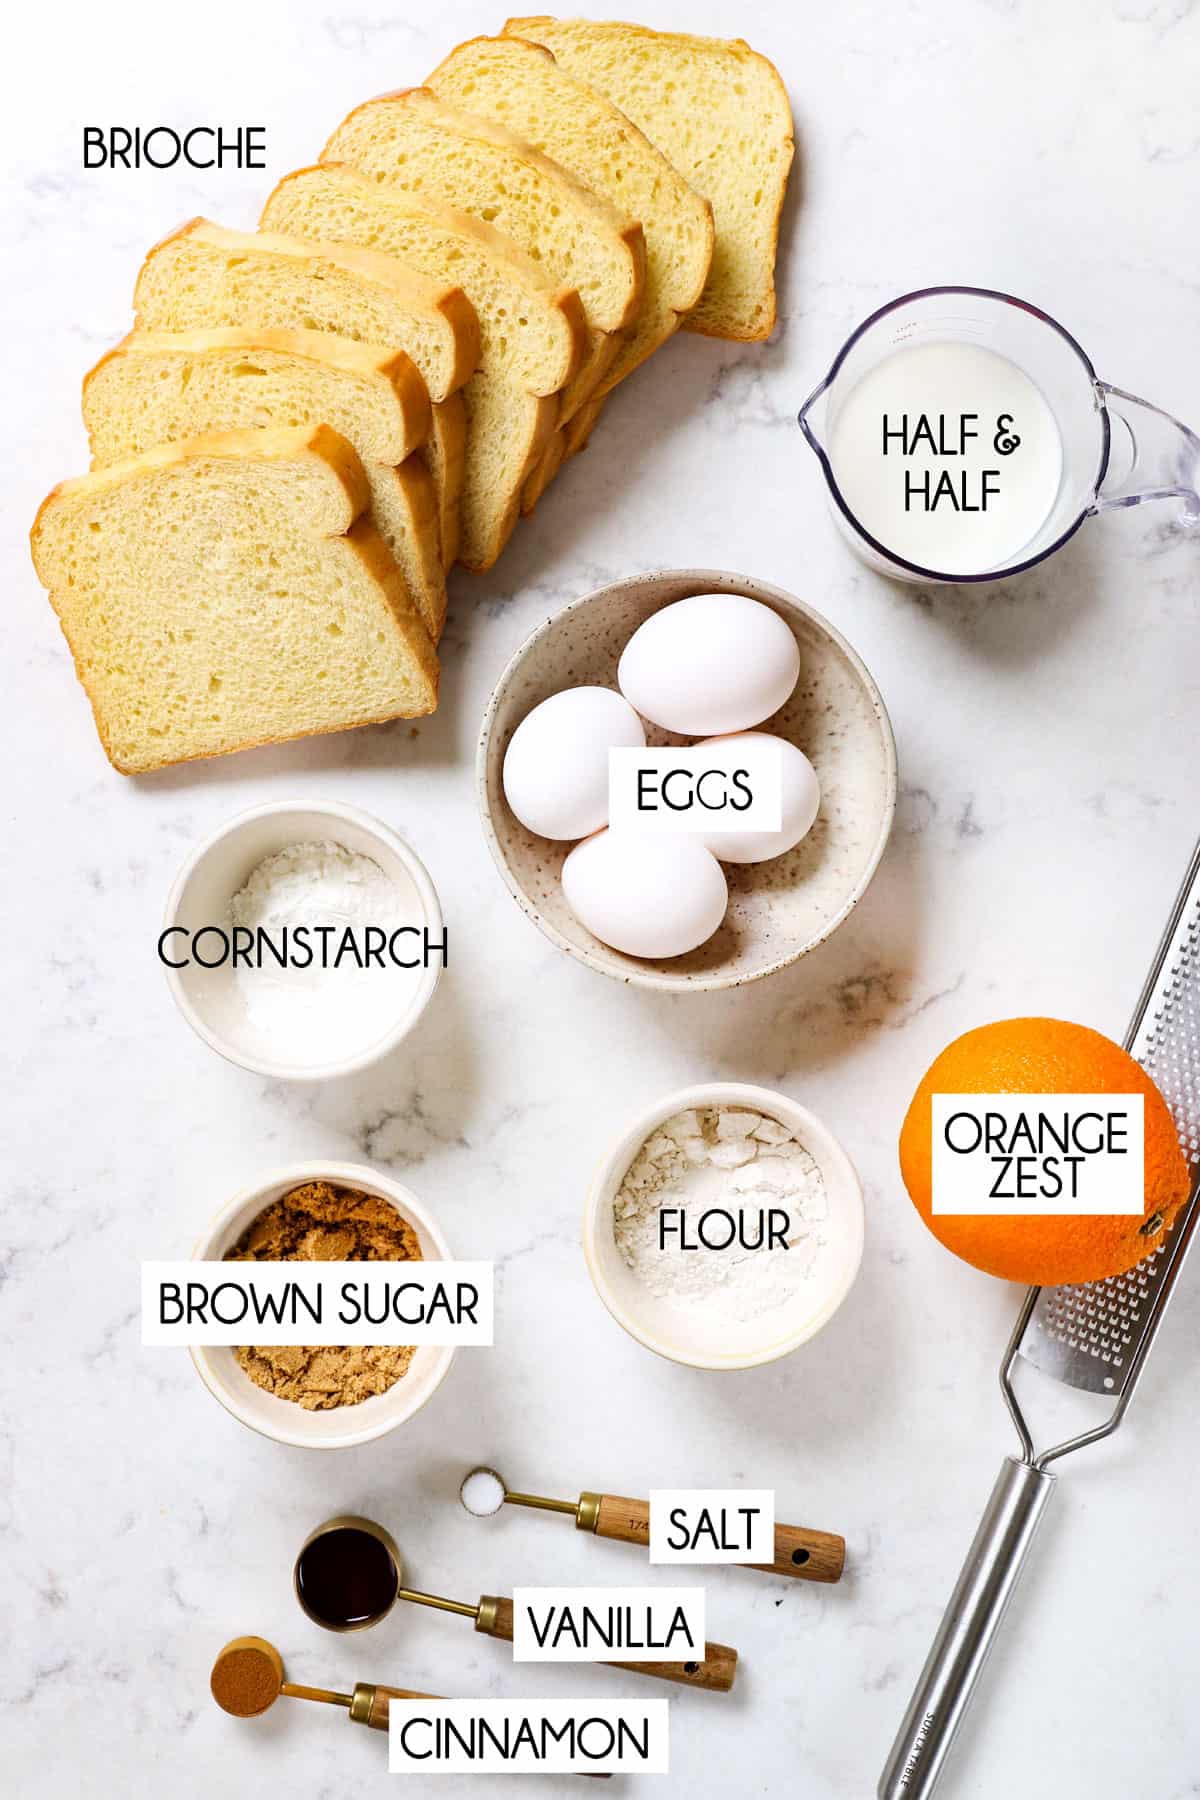 showing ingredients for French toast lined up:  brioche bread, eggs, half and half, flour, vanilla extract, salt, nutmeg and orange zest